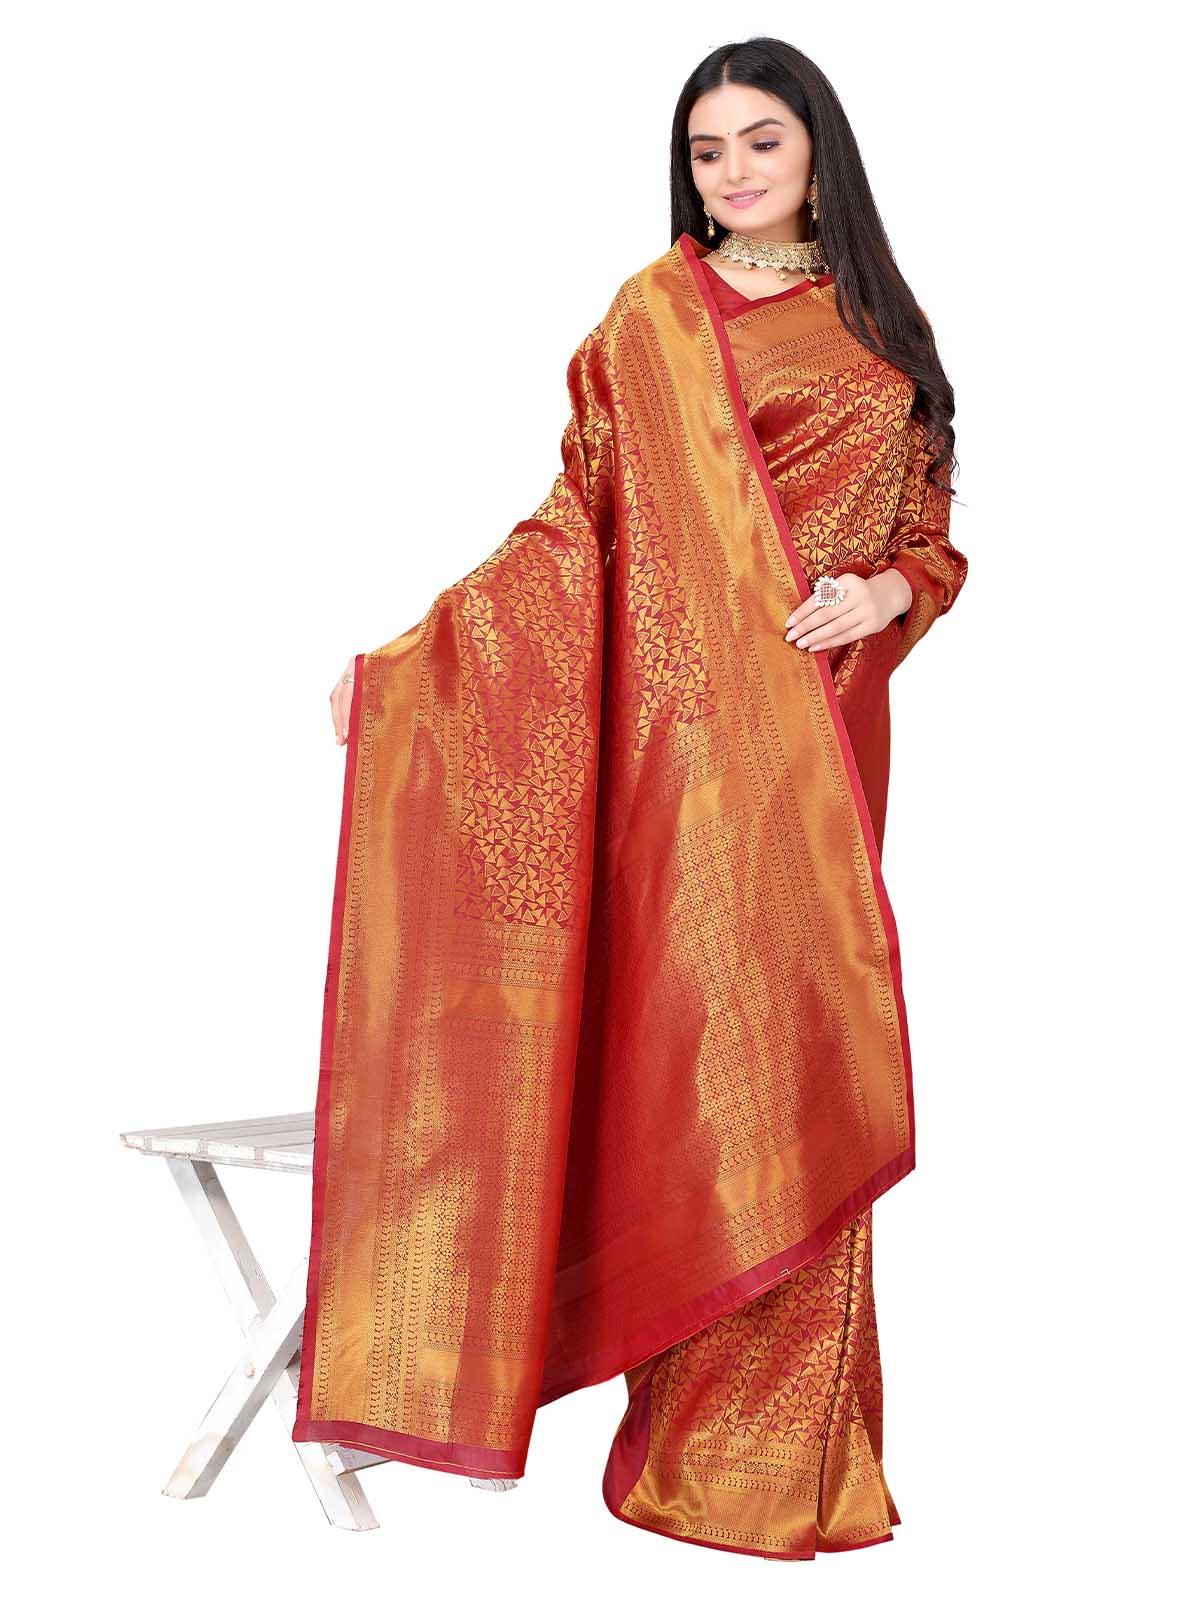 Red Silk Blend Woven Saree With Blouse - Odette